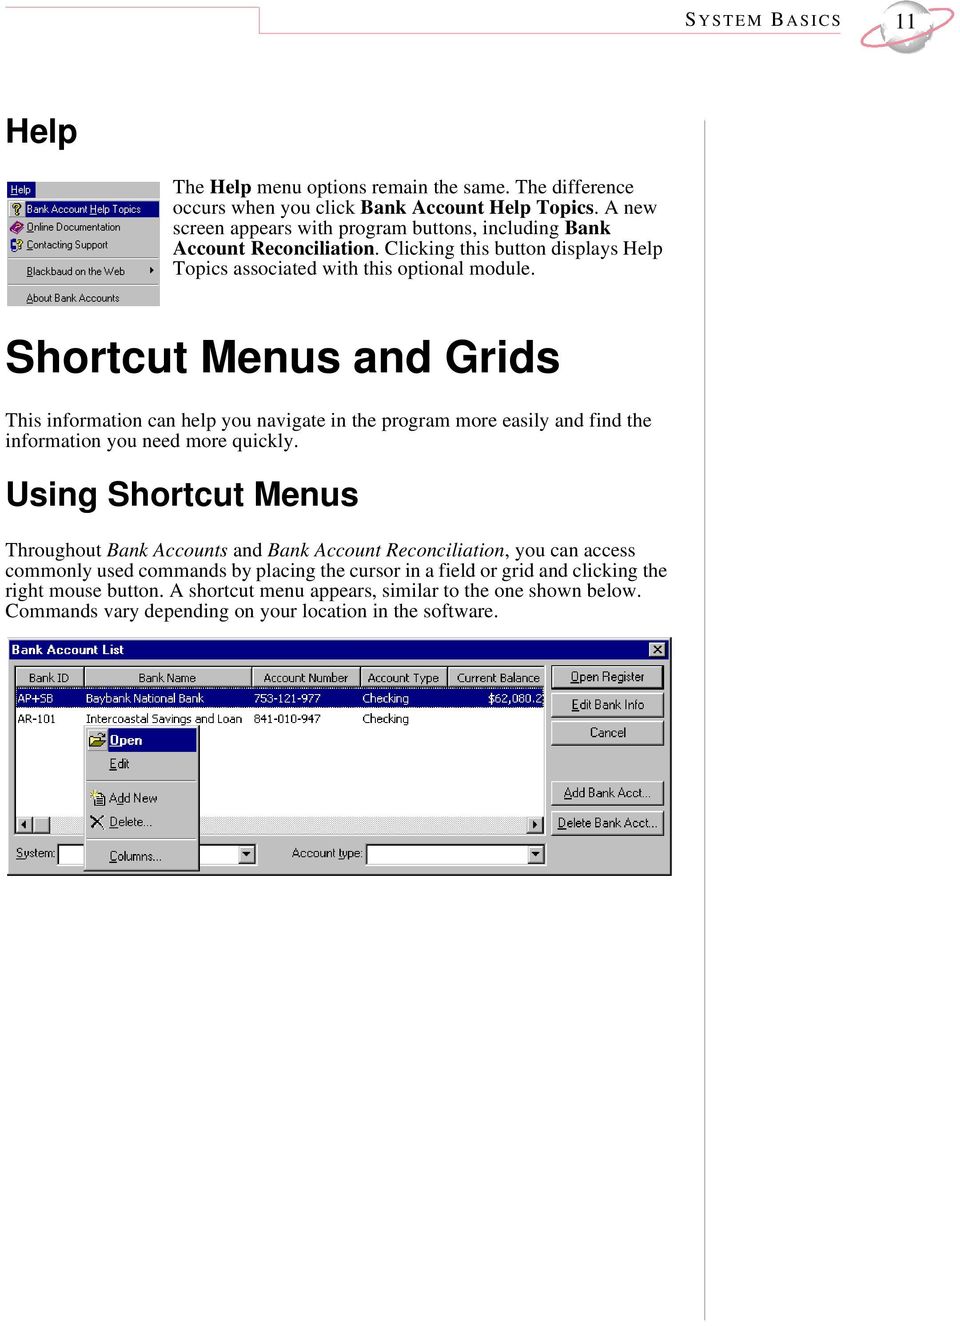 Shortcut Menus and Grids This information can help you navigate in the program more easily and find the information you need more quickly.